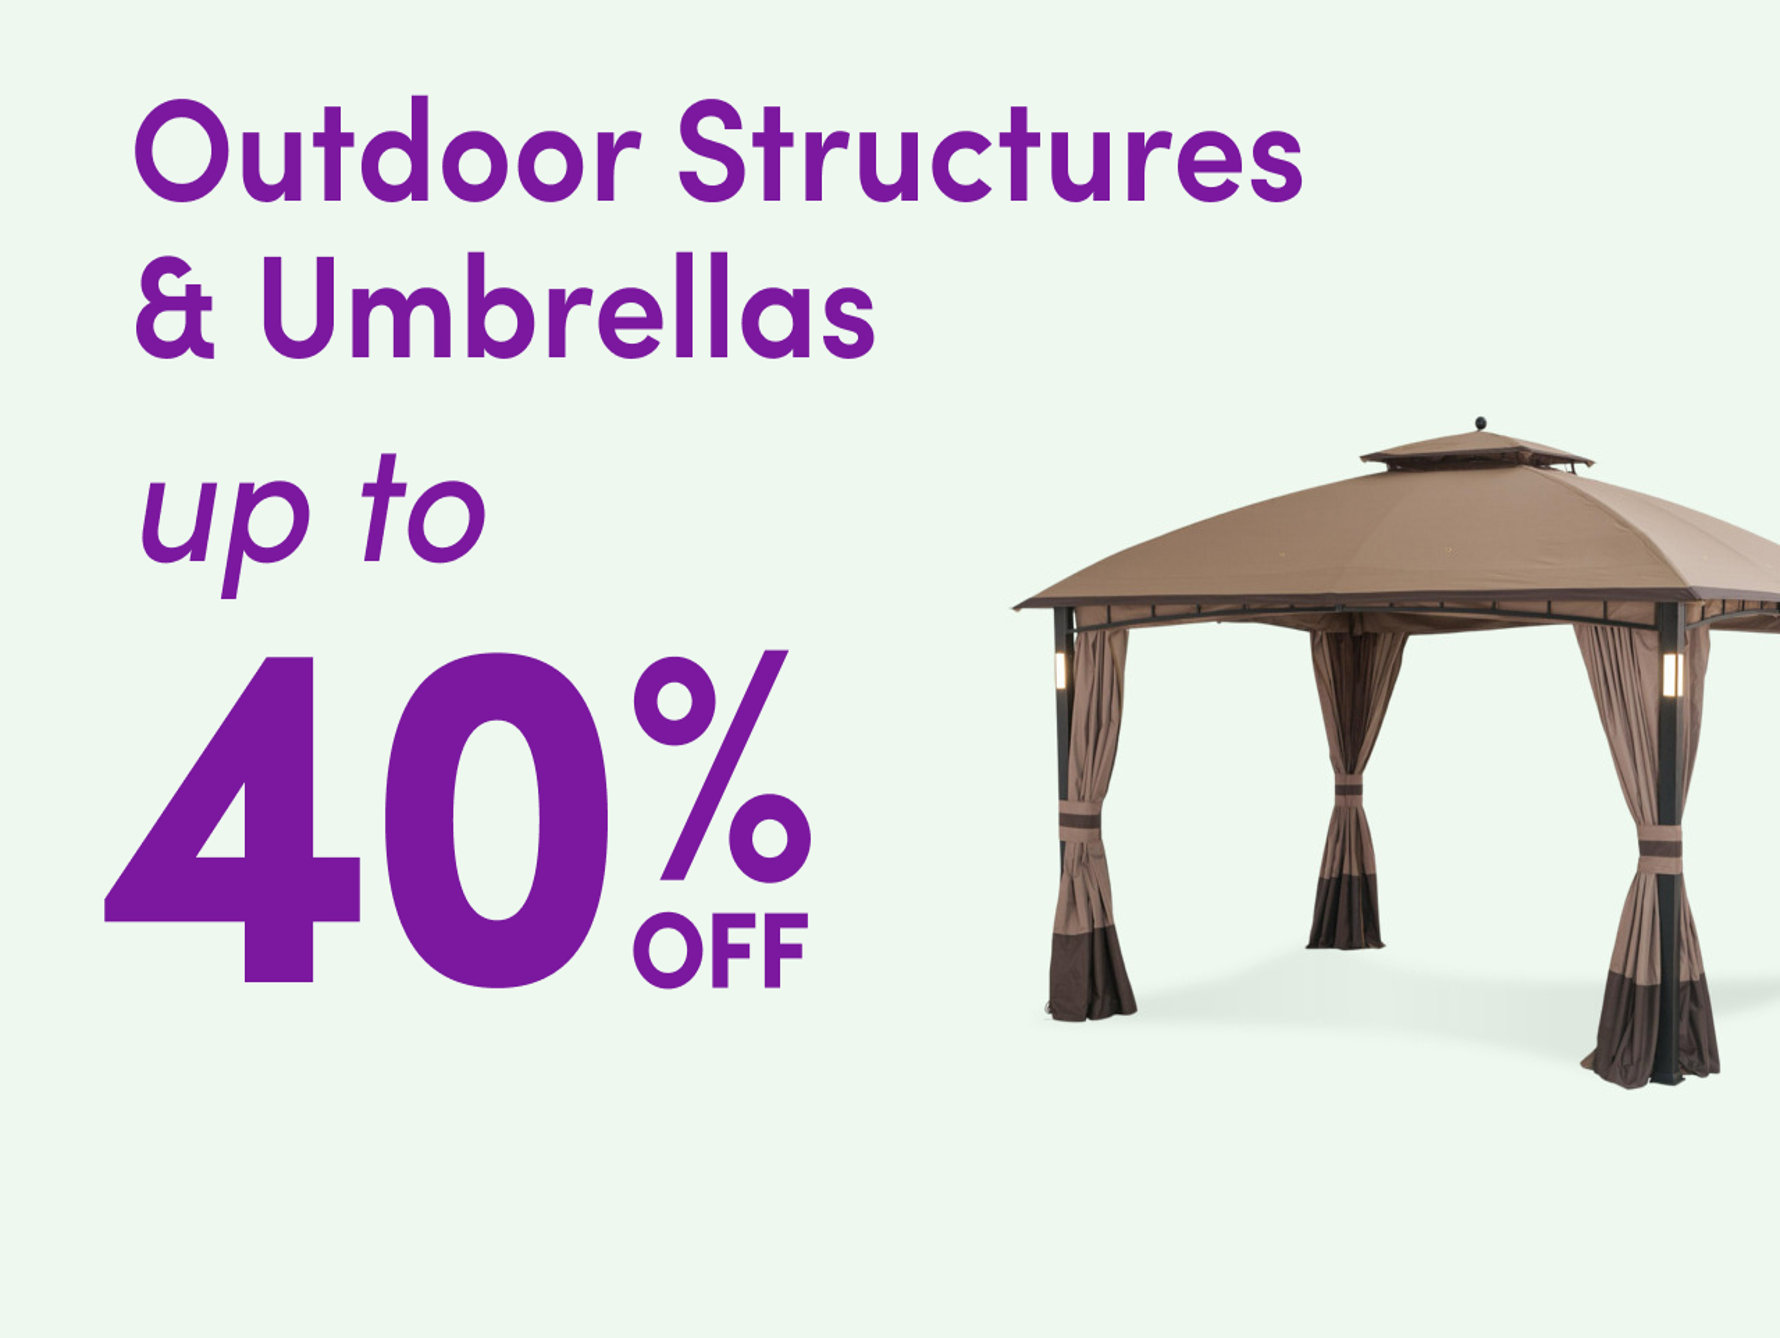 Outdoor Structures & Umbrellas up to 40% off